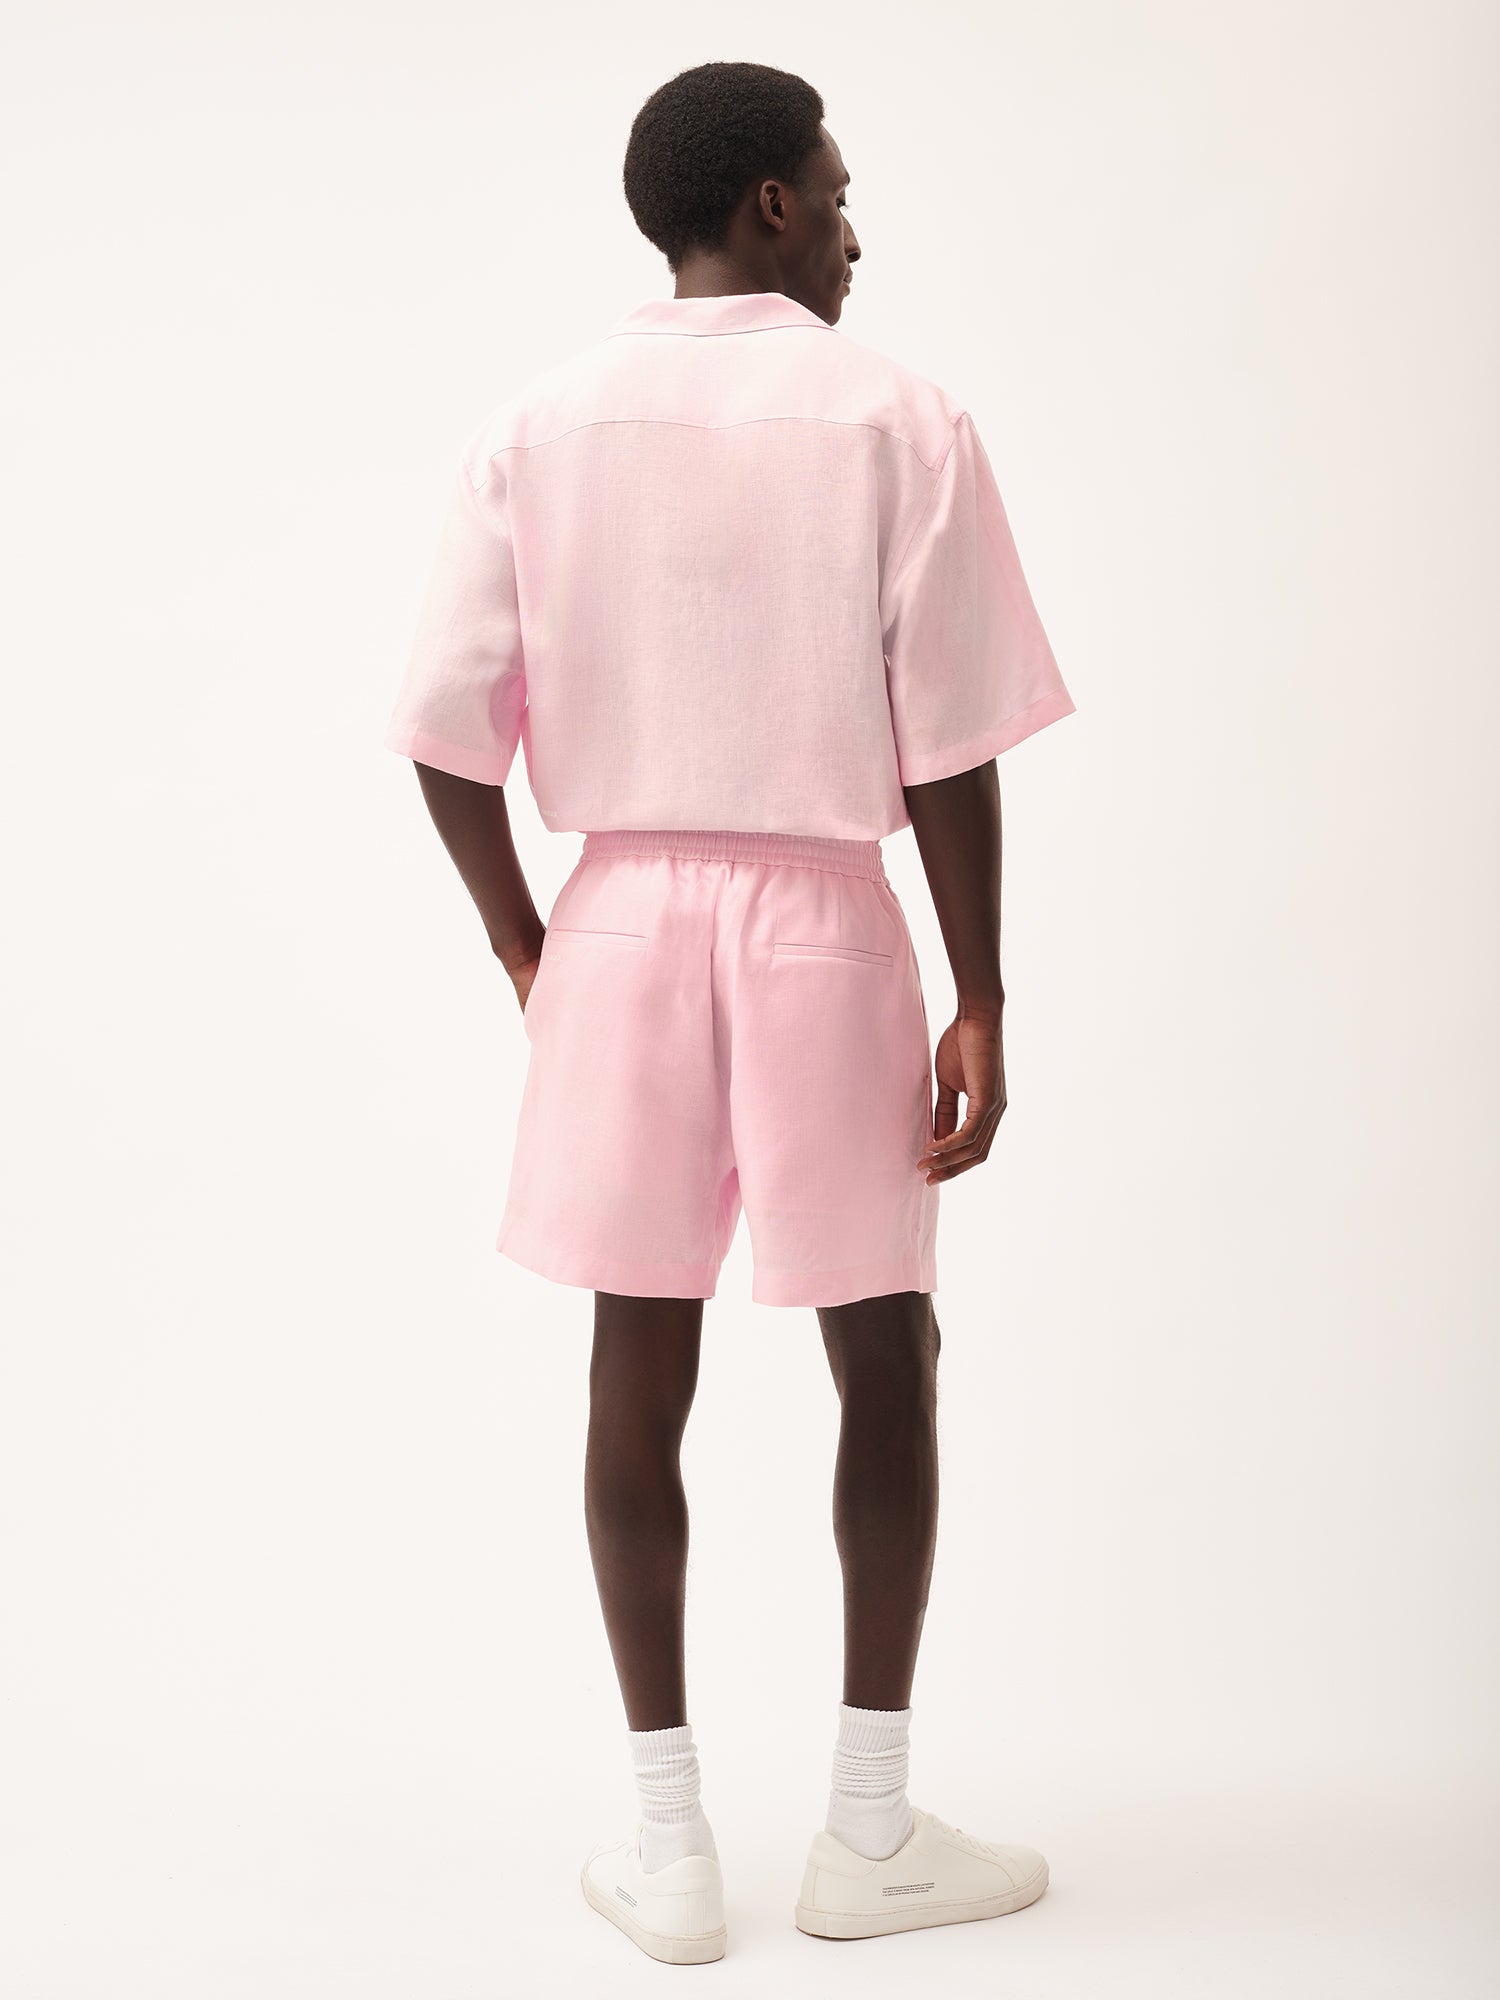 DNA_Linen_Mid_Length_Shorts_MagnoliaPink_Male-2